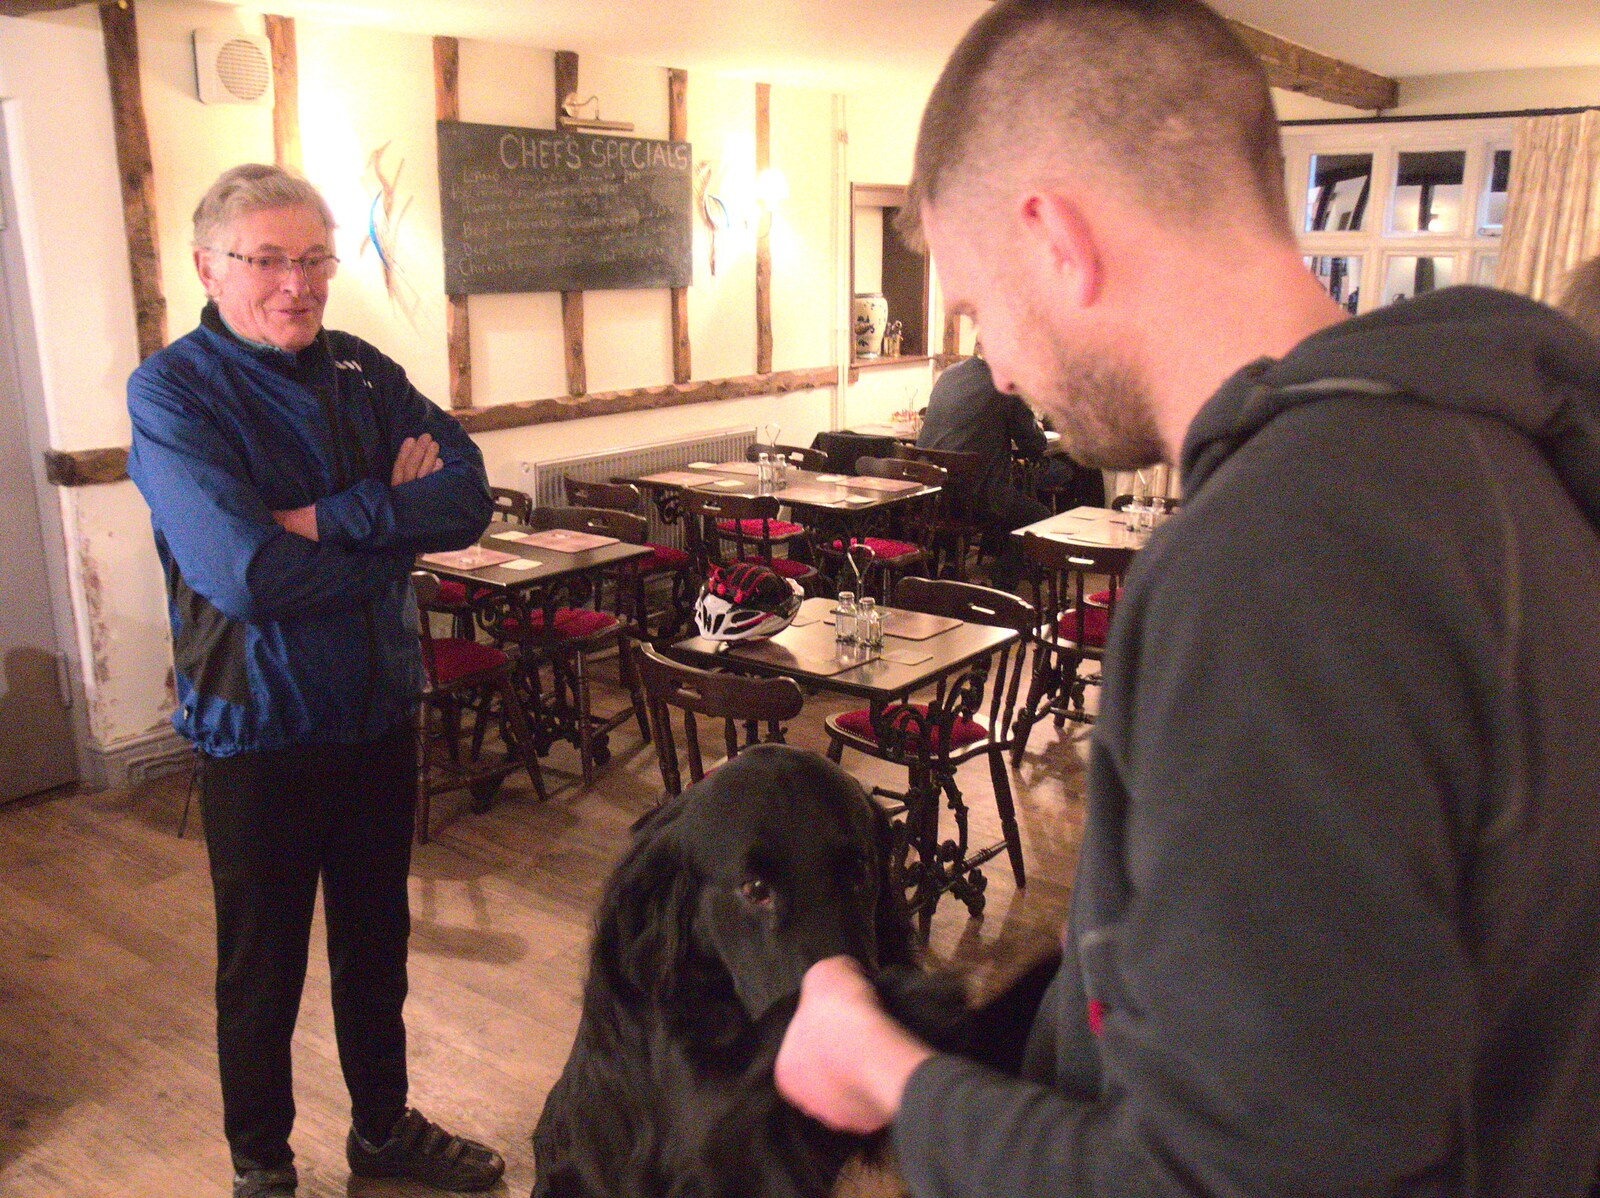 The Boy Phil says hello to a dog from Darts at the Beaky, and a Visit From Brussels, Occold and Thorndon, Suffolk - 9th April 2018